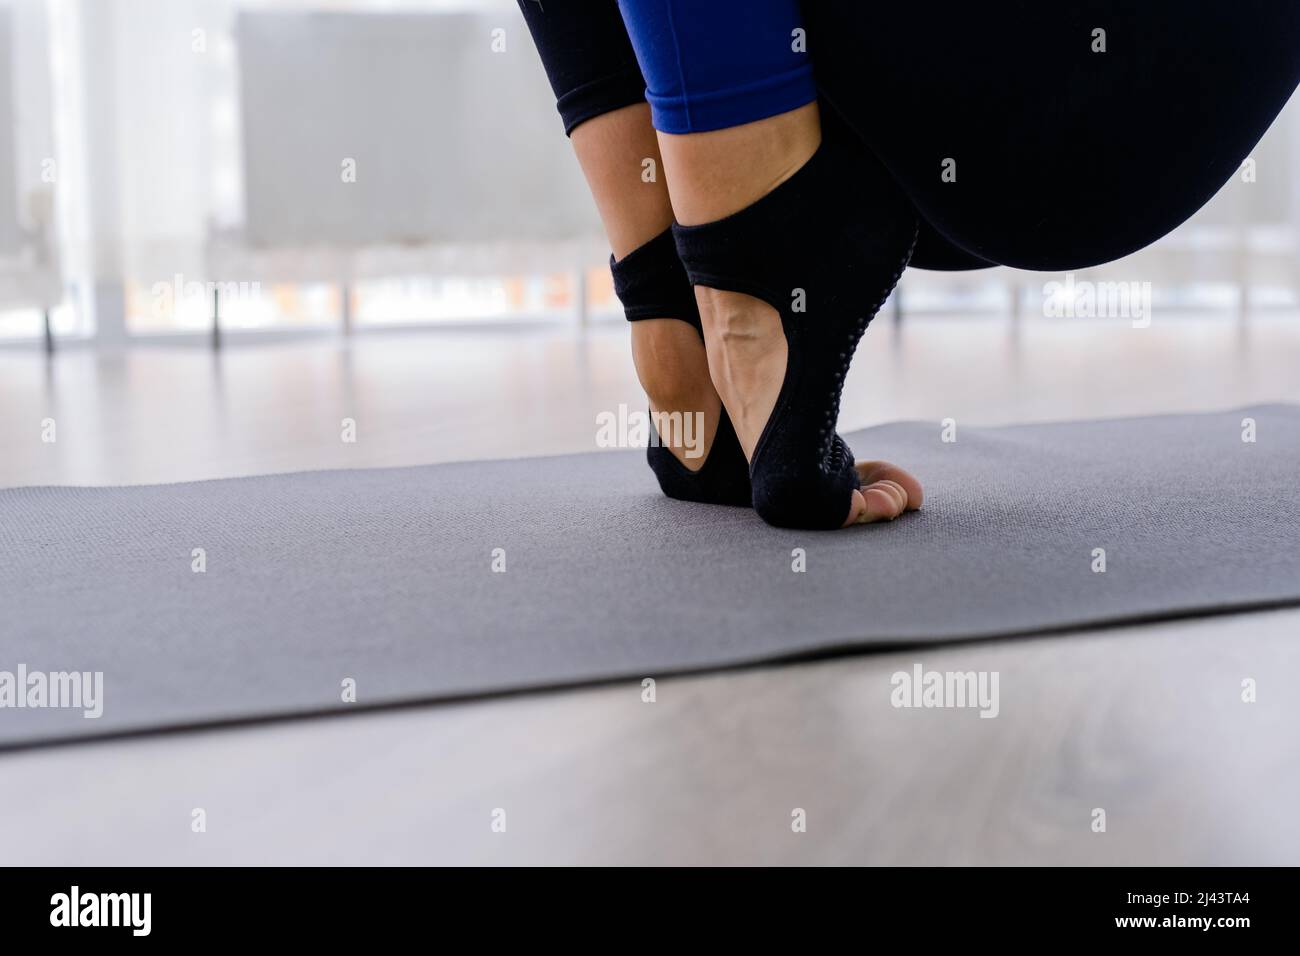 Close up Woman in purple leggings putting on her grey socks. Lady prepare for yoga workout. Concept of yoga accessories  Stock Photo